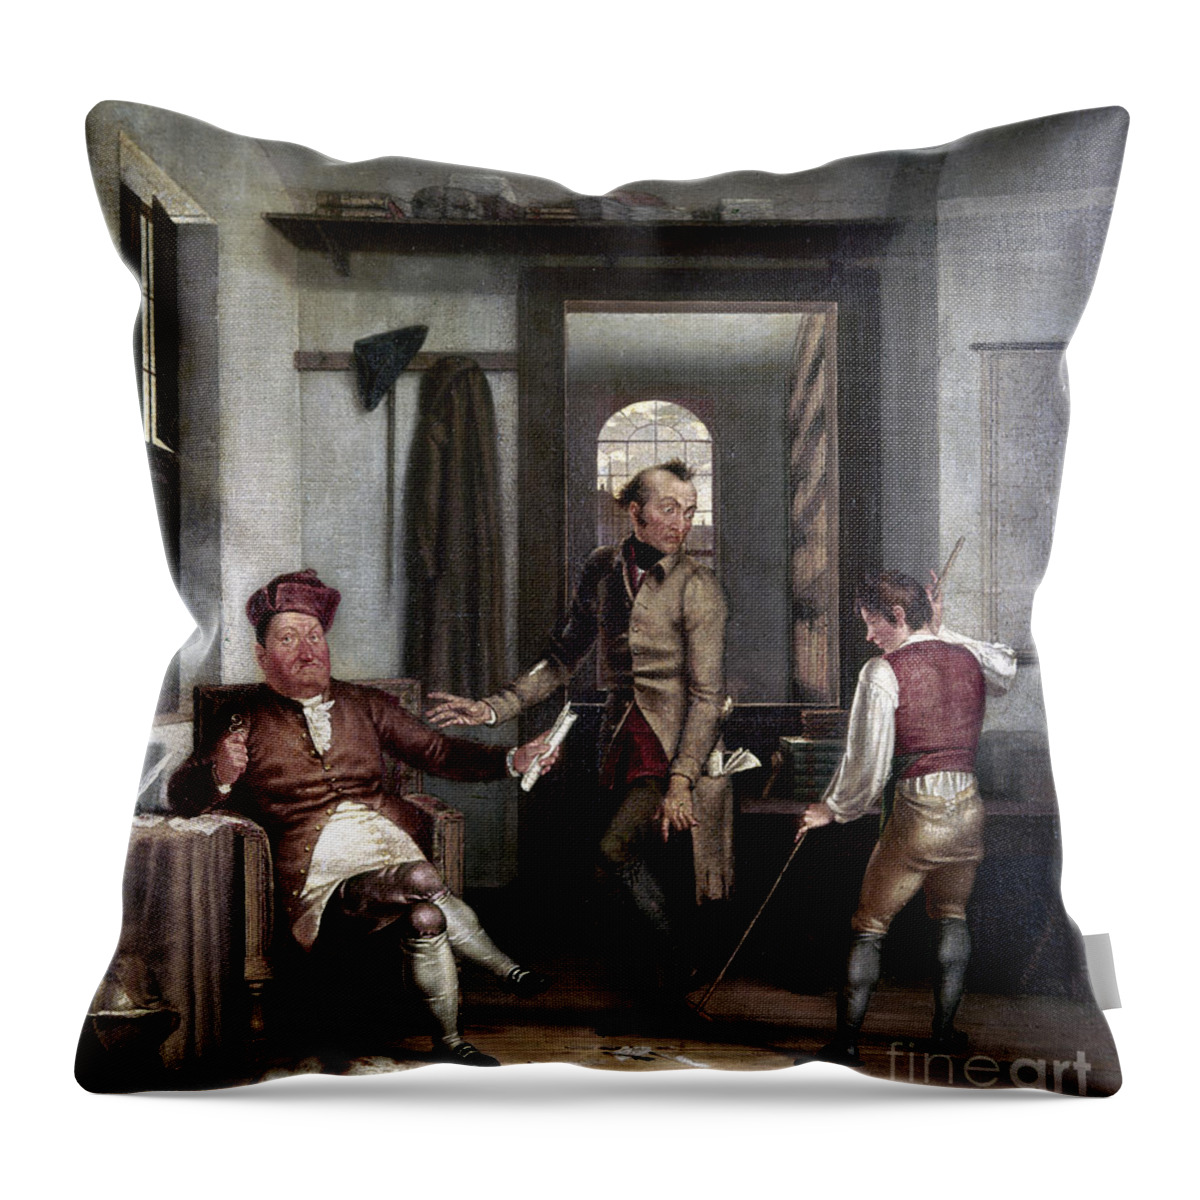 1811 Throw Pillow featuring the photograph Author & Bookseller, 1811 by Granger